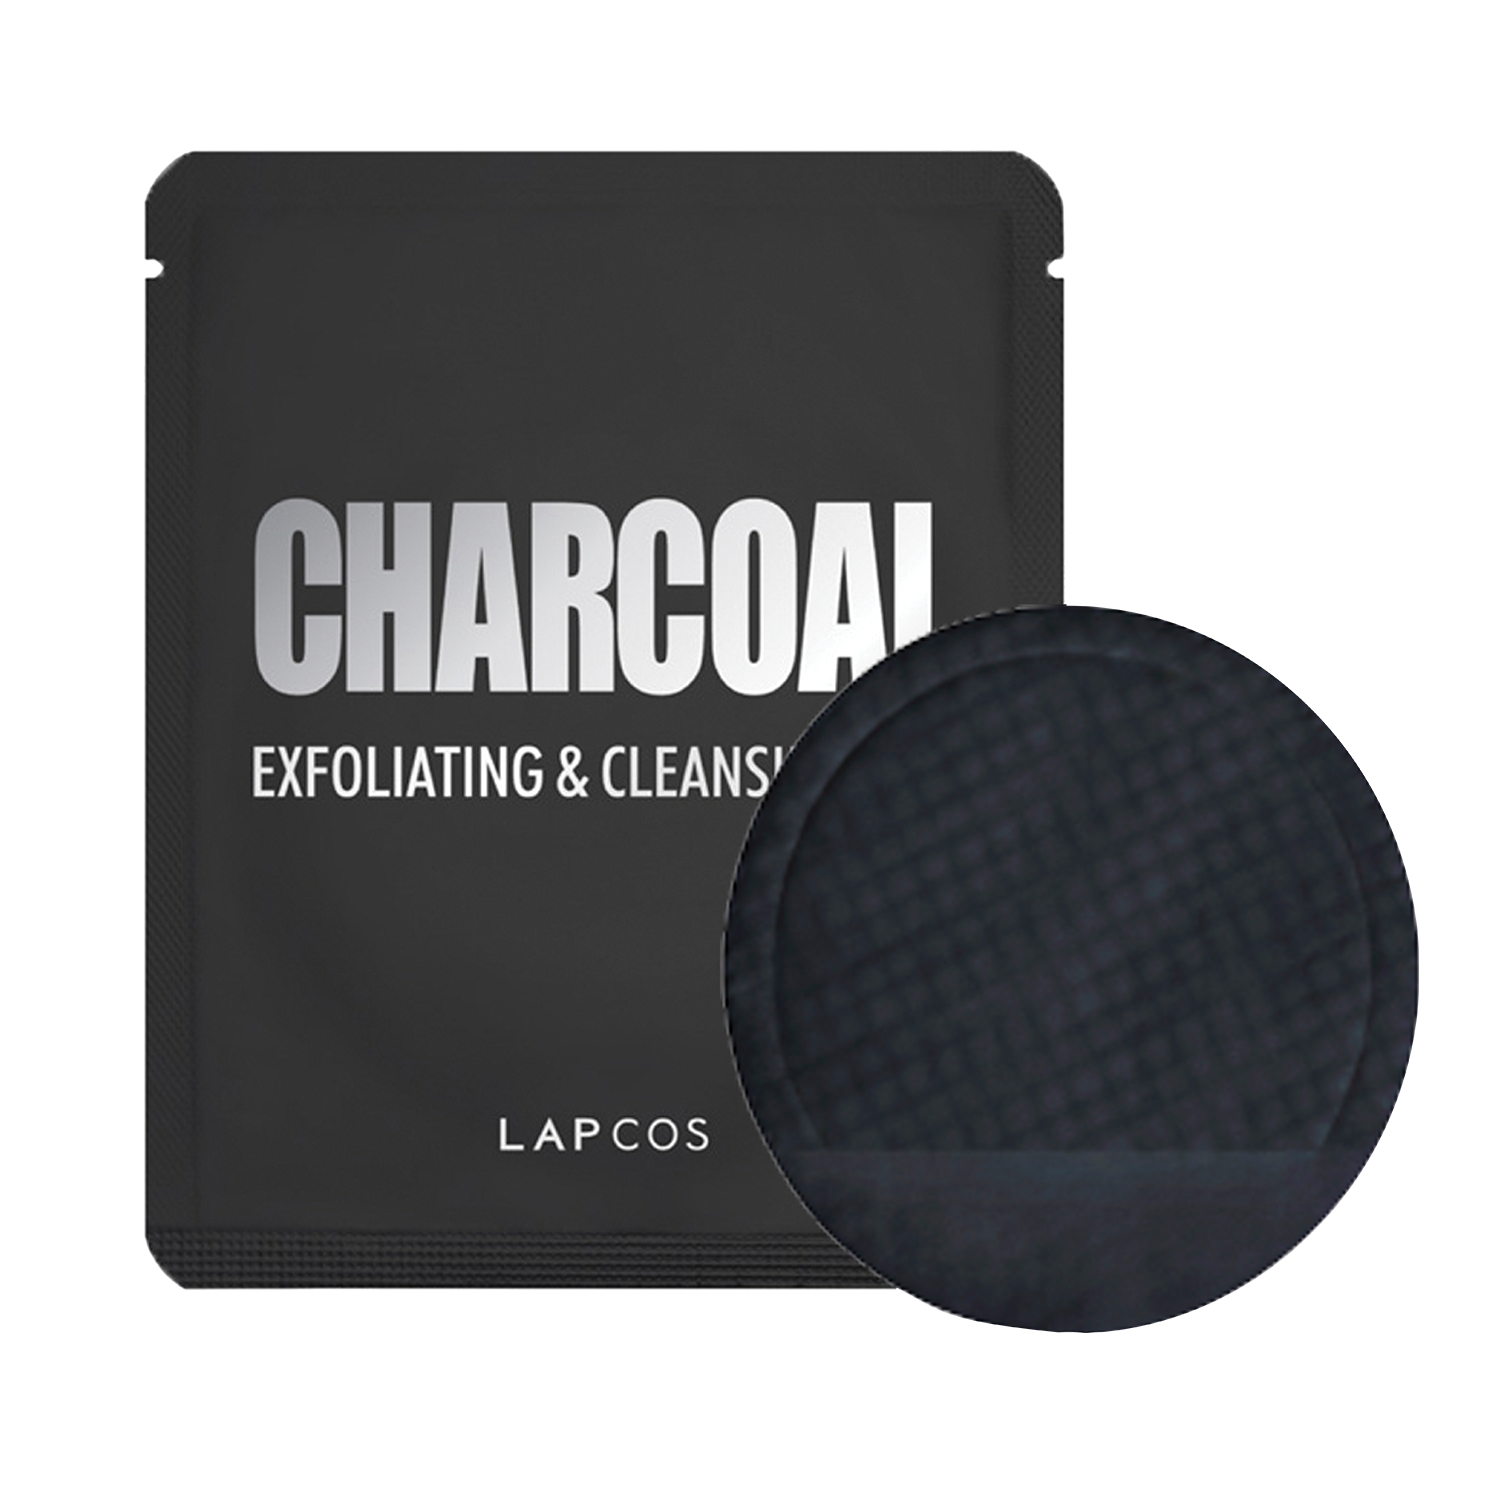 LAPCOS Charcoal exfoliating and cleansing pad  1